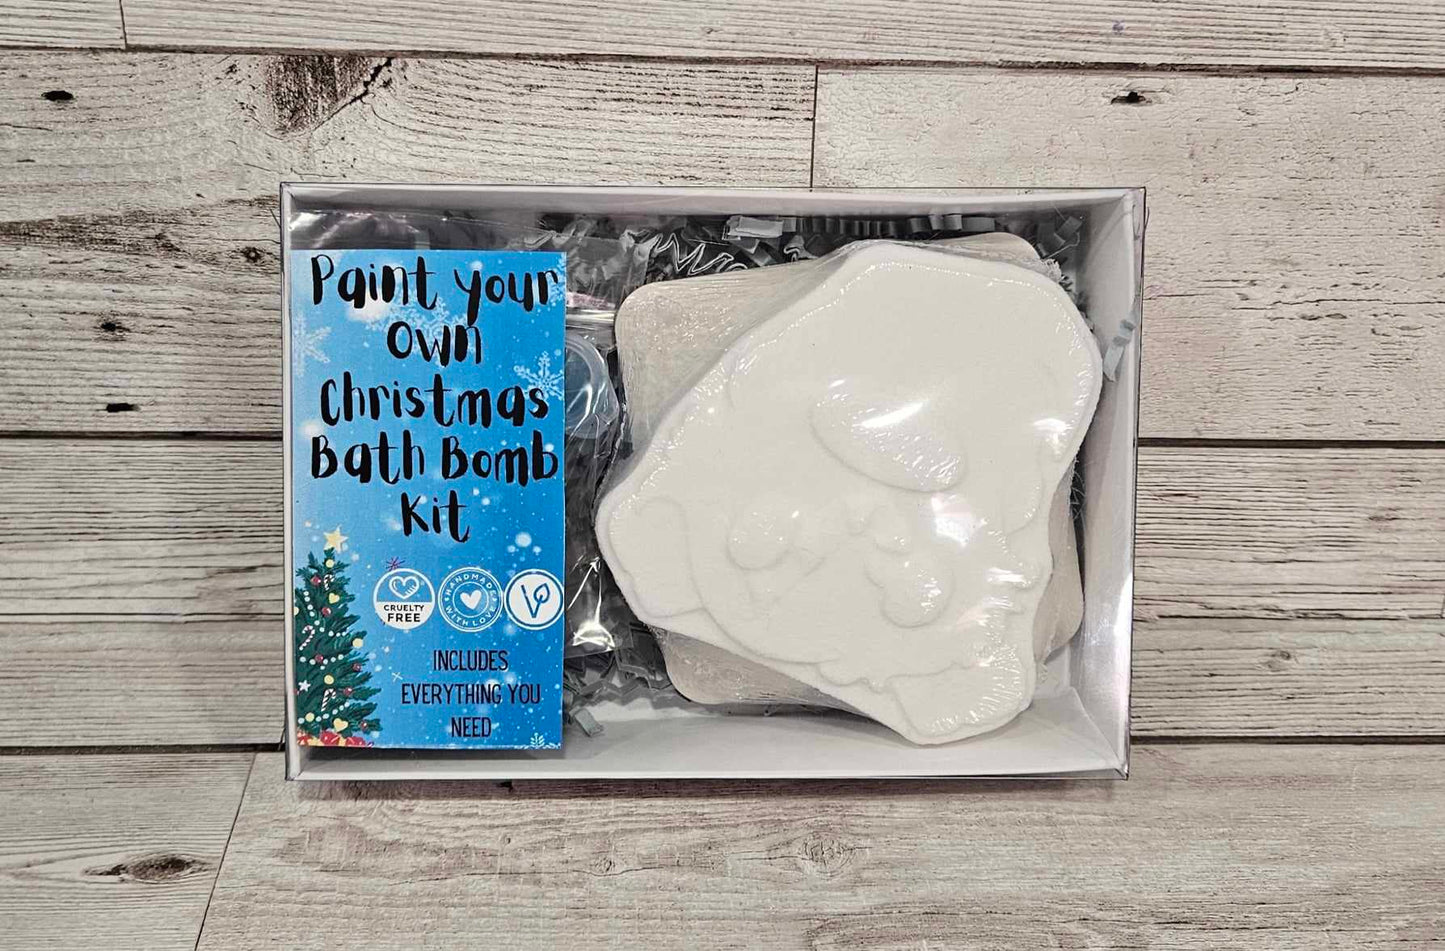 'Candy Cane Gonk' Paint your Own Bath Bomb kit